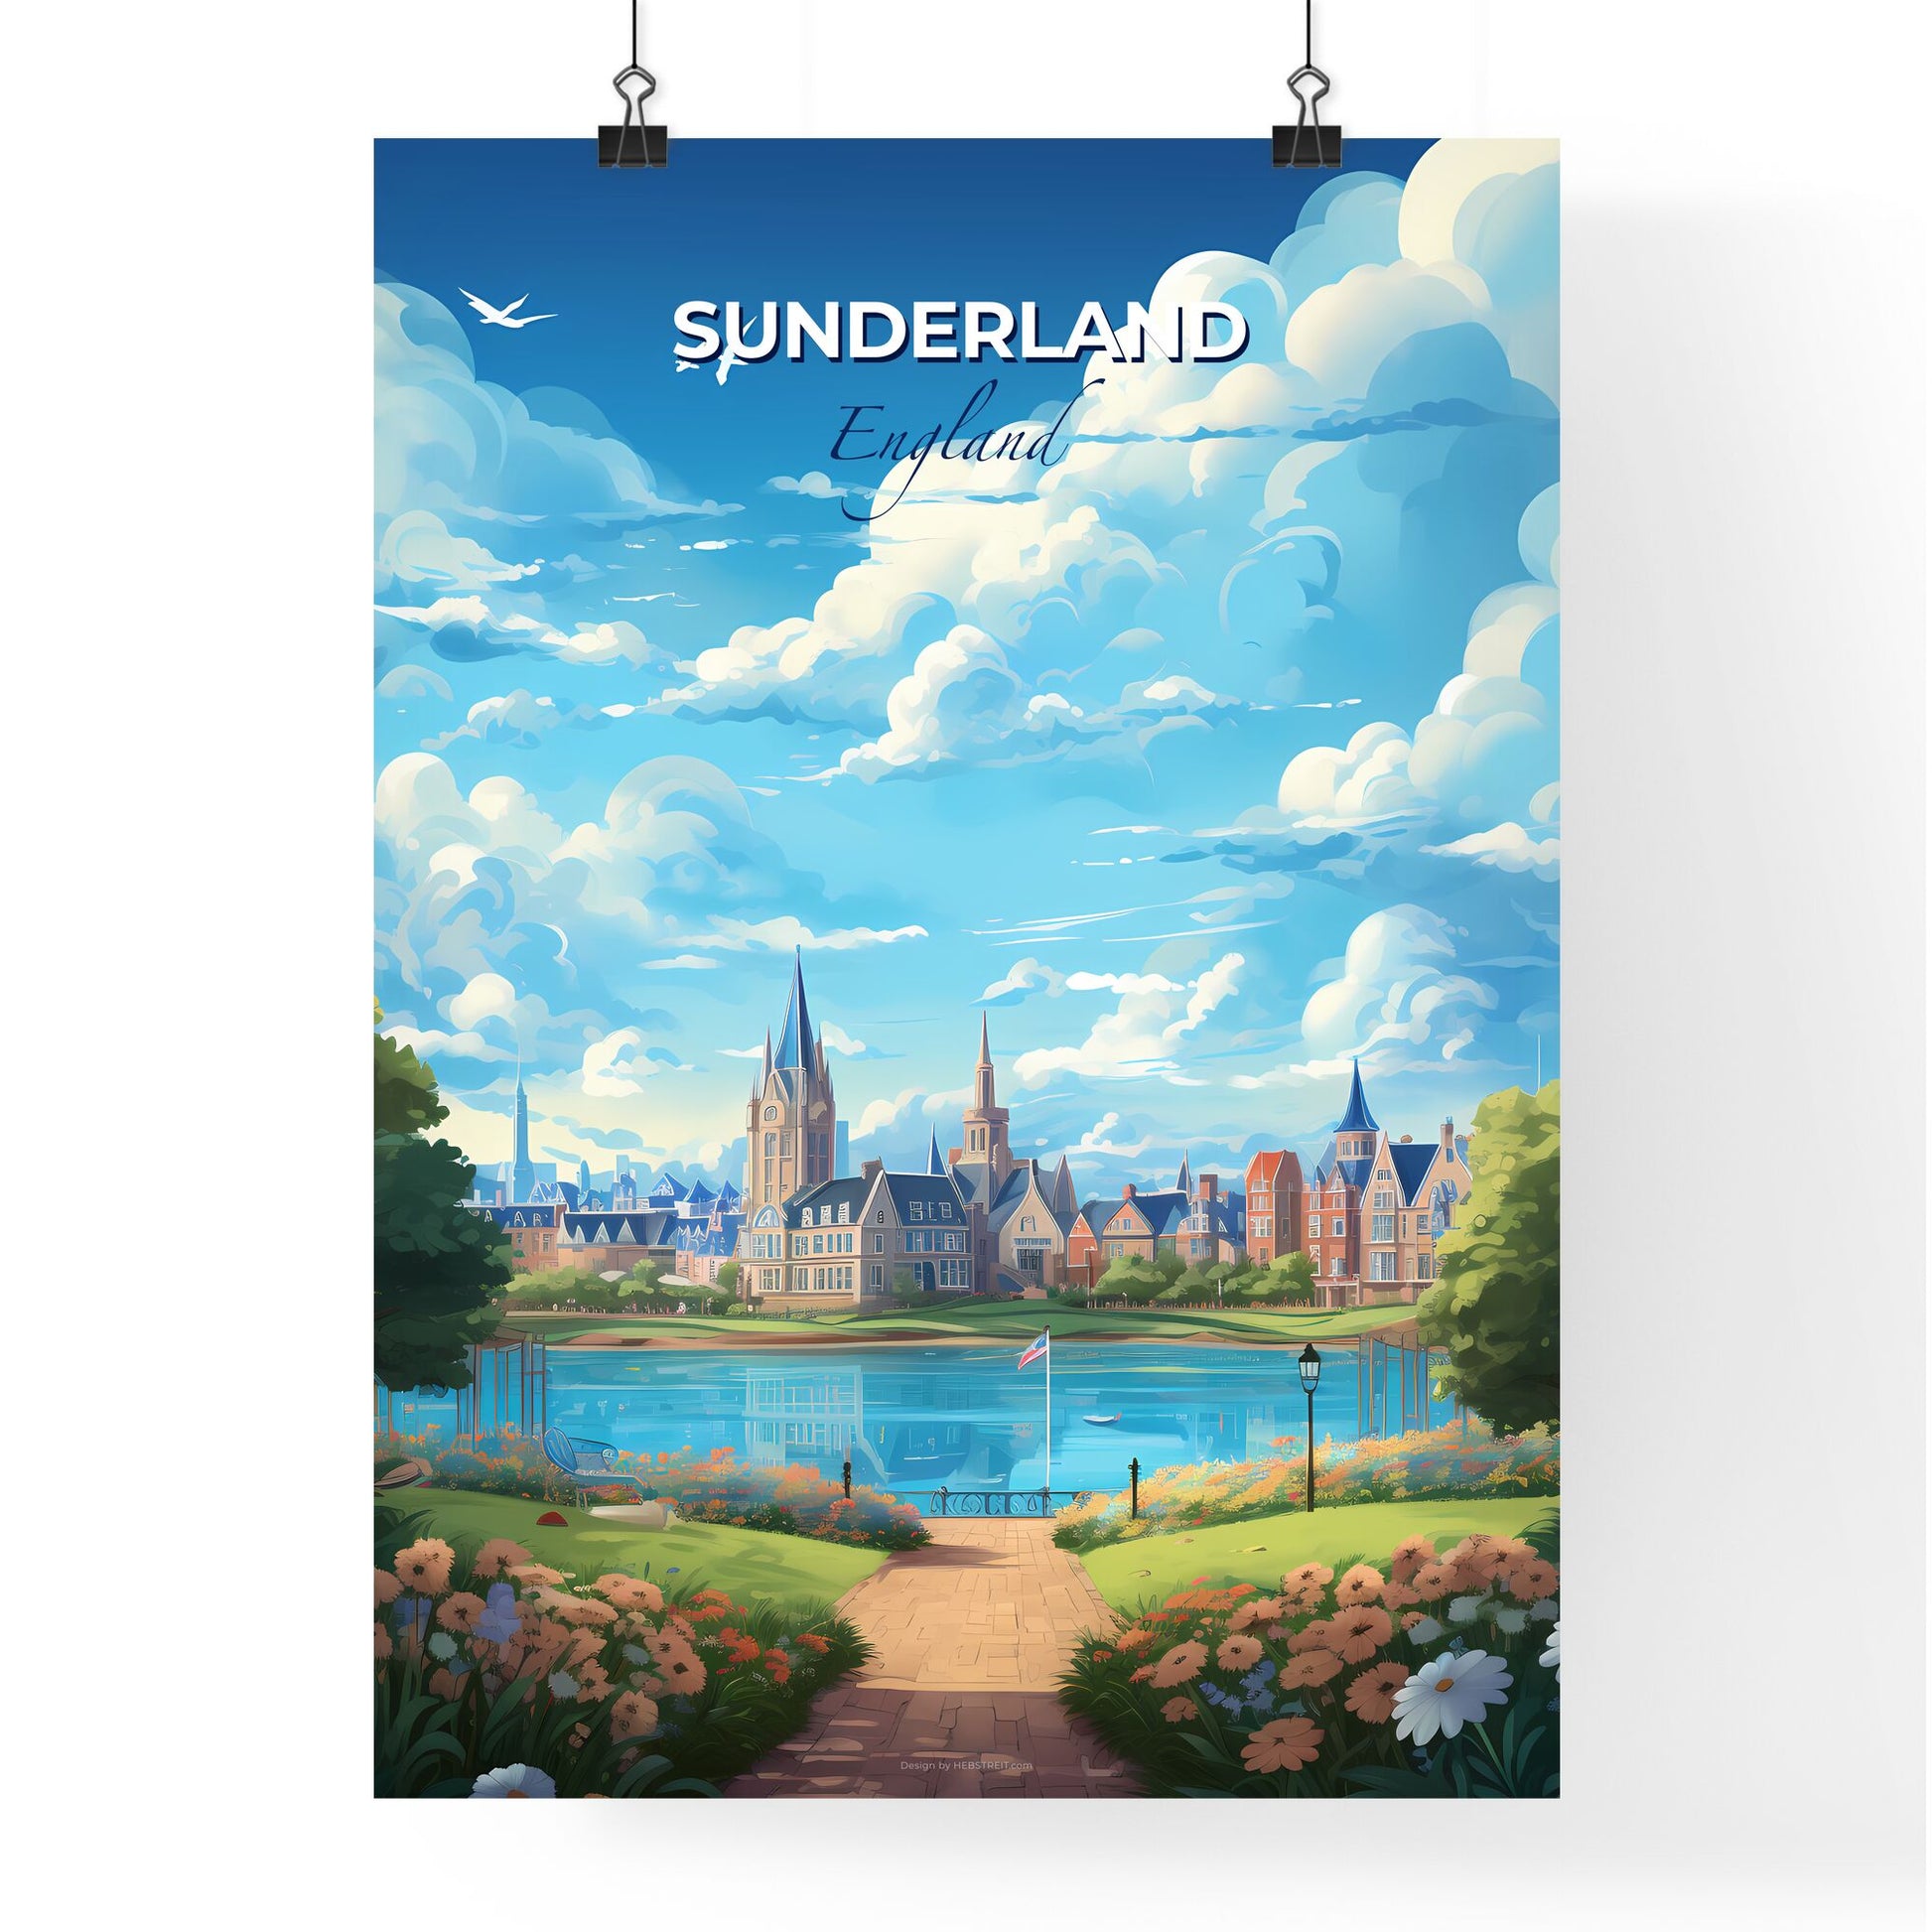 Sunderland England Skyline - A Landscape Of A City With A Lake And Trees - Customizable Travel Gift Default Title